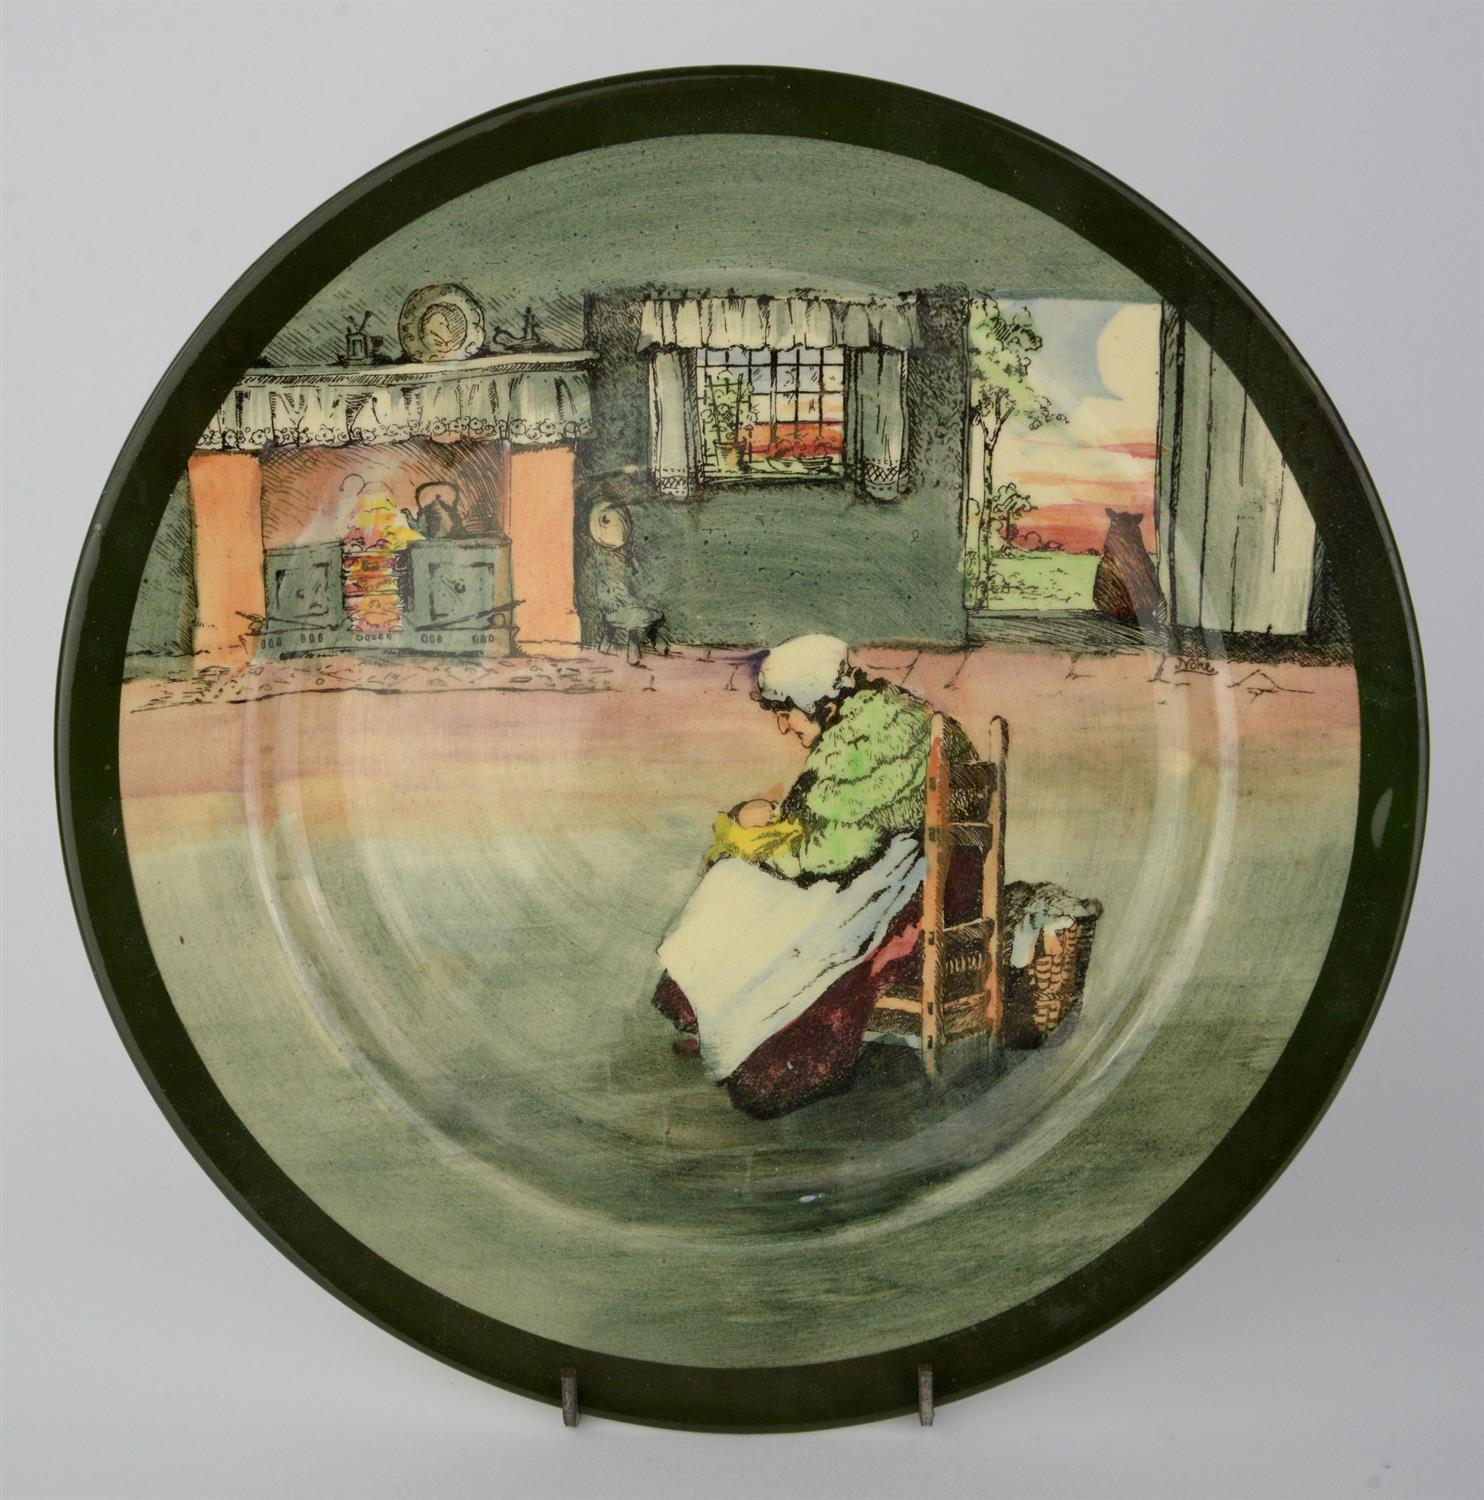 Two Royal Doulton plates. One from the Fireside series 'Old lady with baby'. The other 'Gaffers' - Image 3 of 3